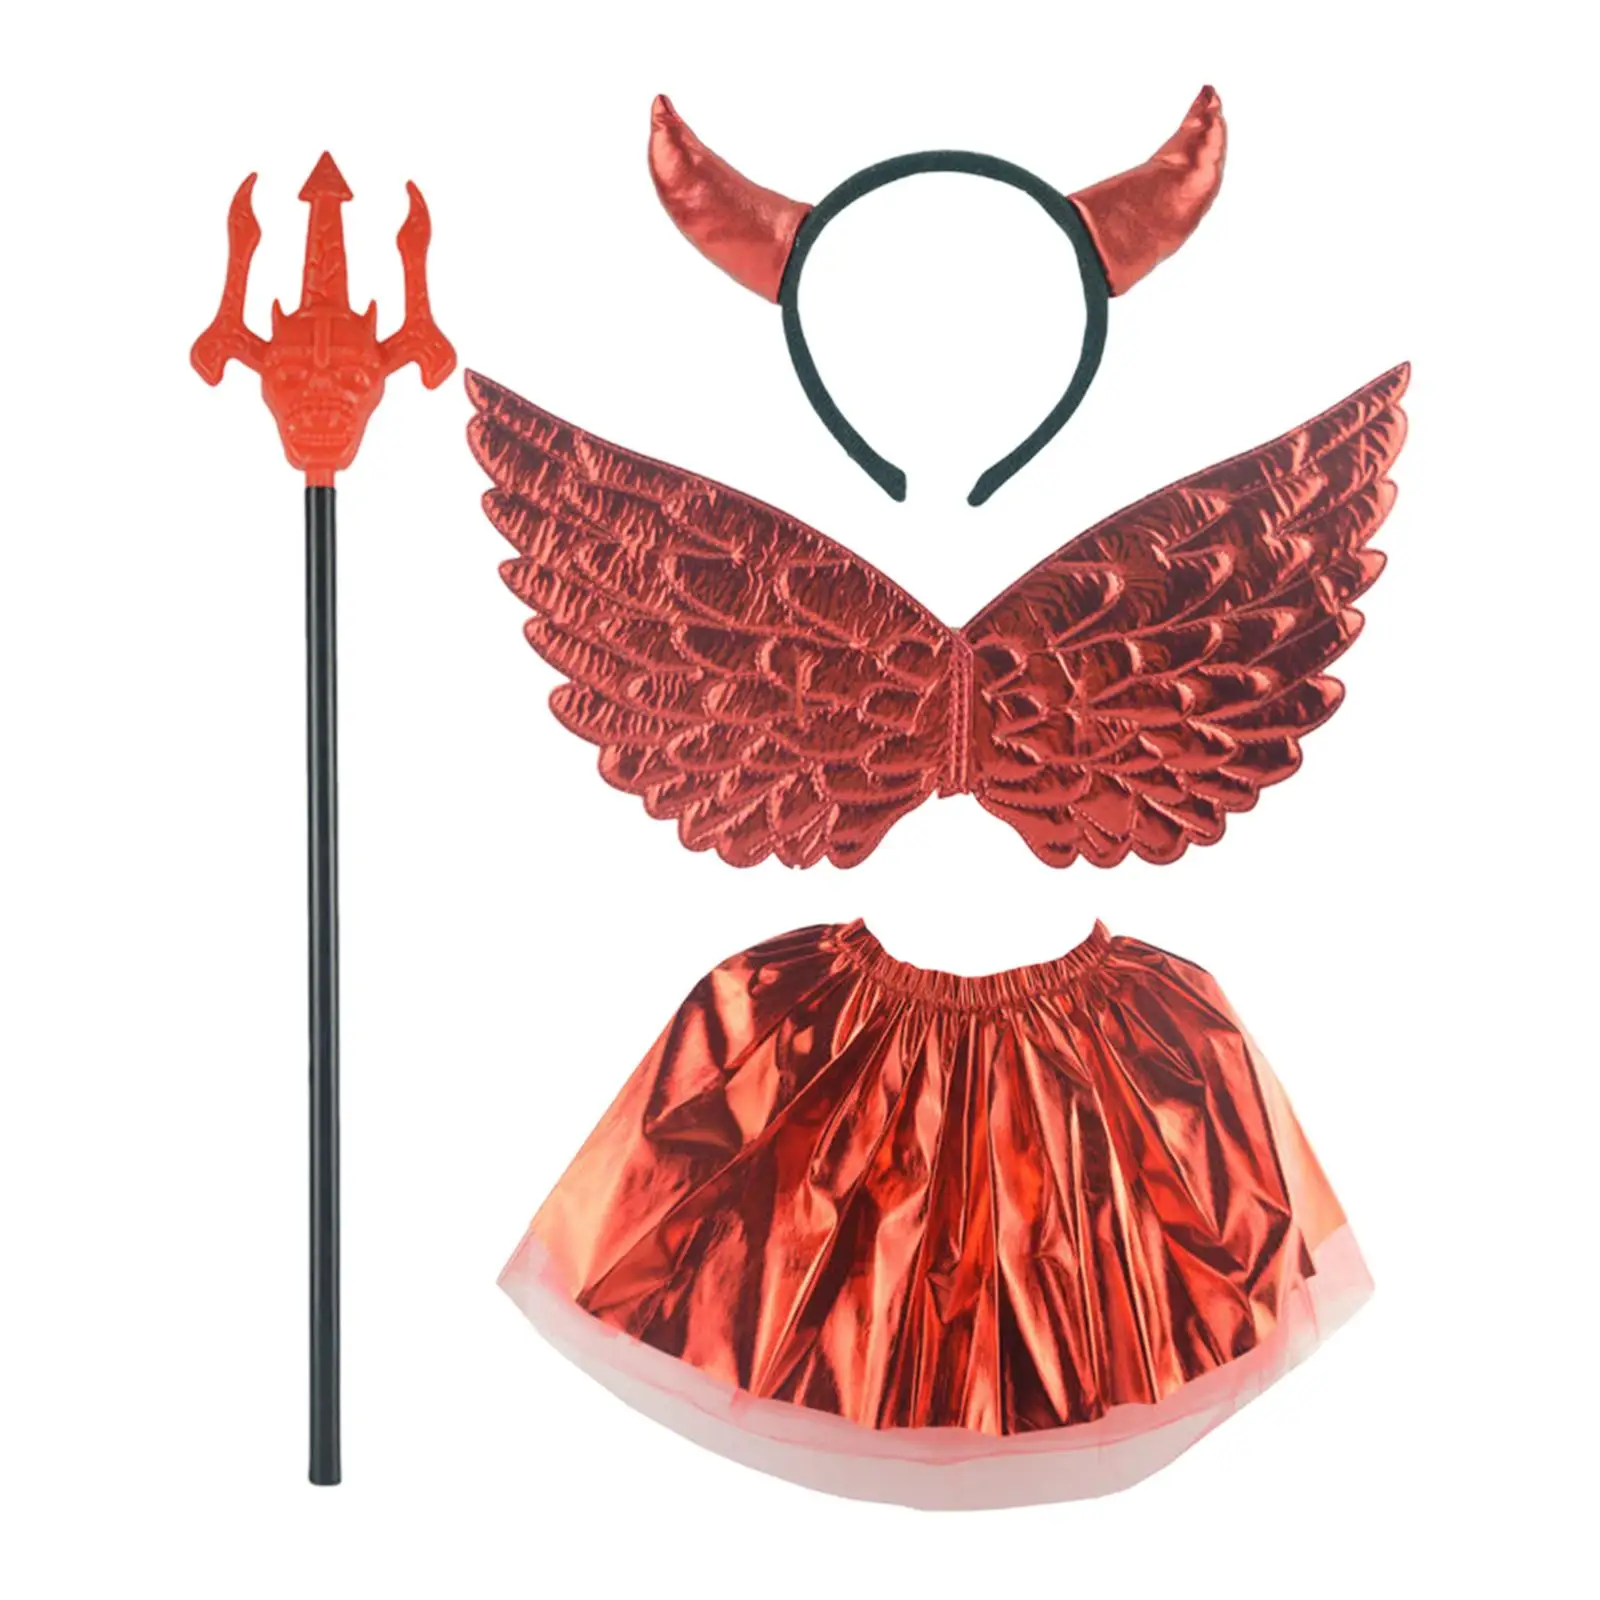 Girls Costume Decoration Hair Hoop Accessories Halloween Devil Costume Set for Stage Performance Prop Nightclub Child Stage Show